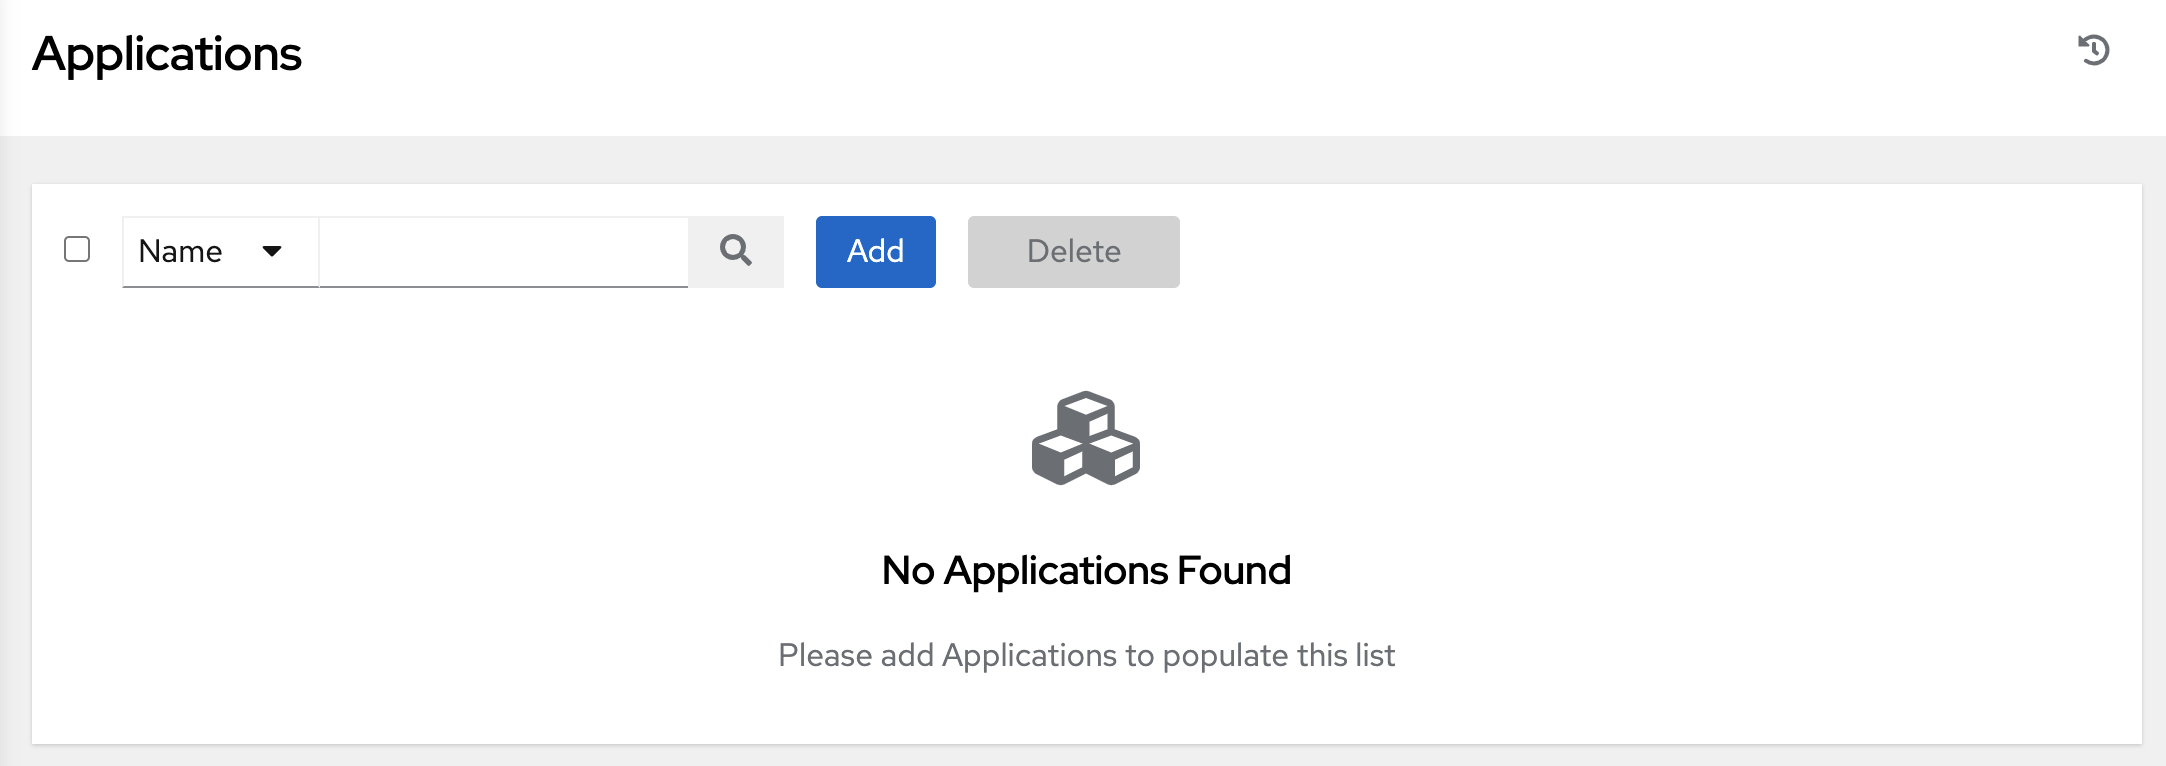 No applications found in the list view